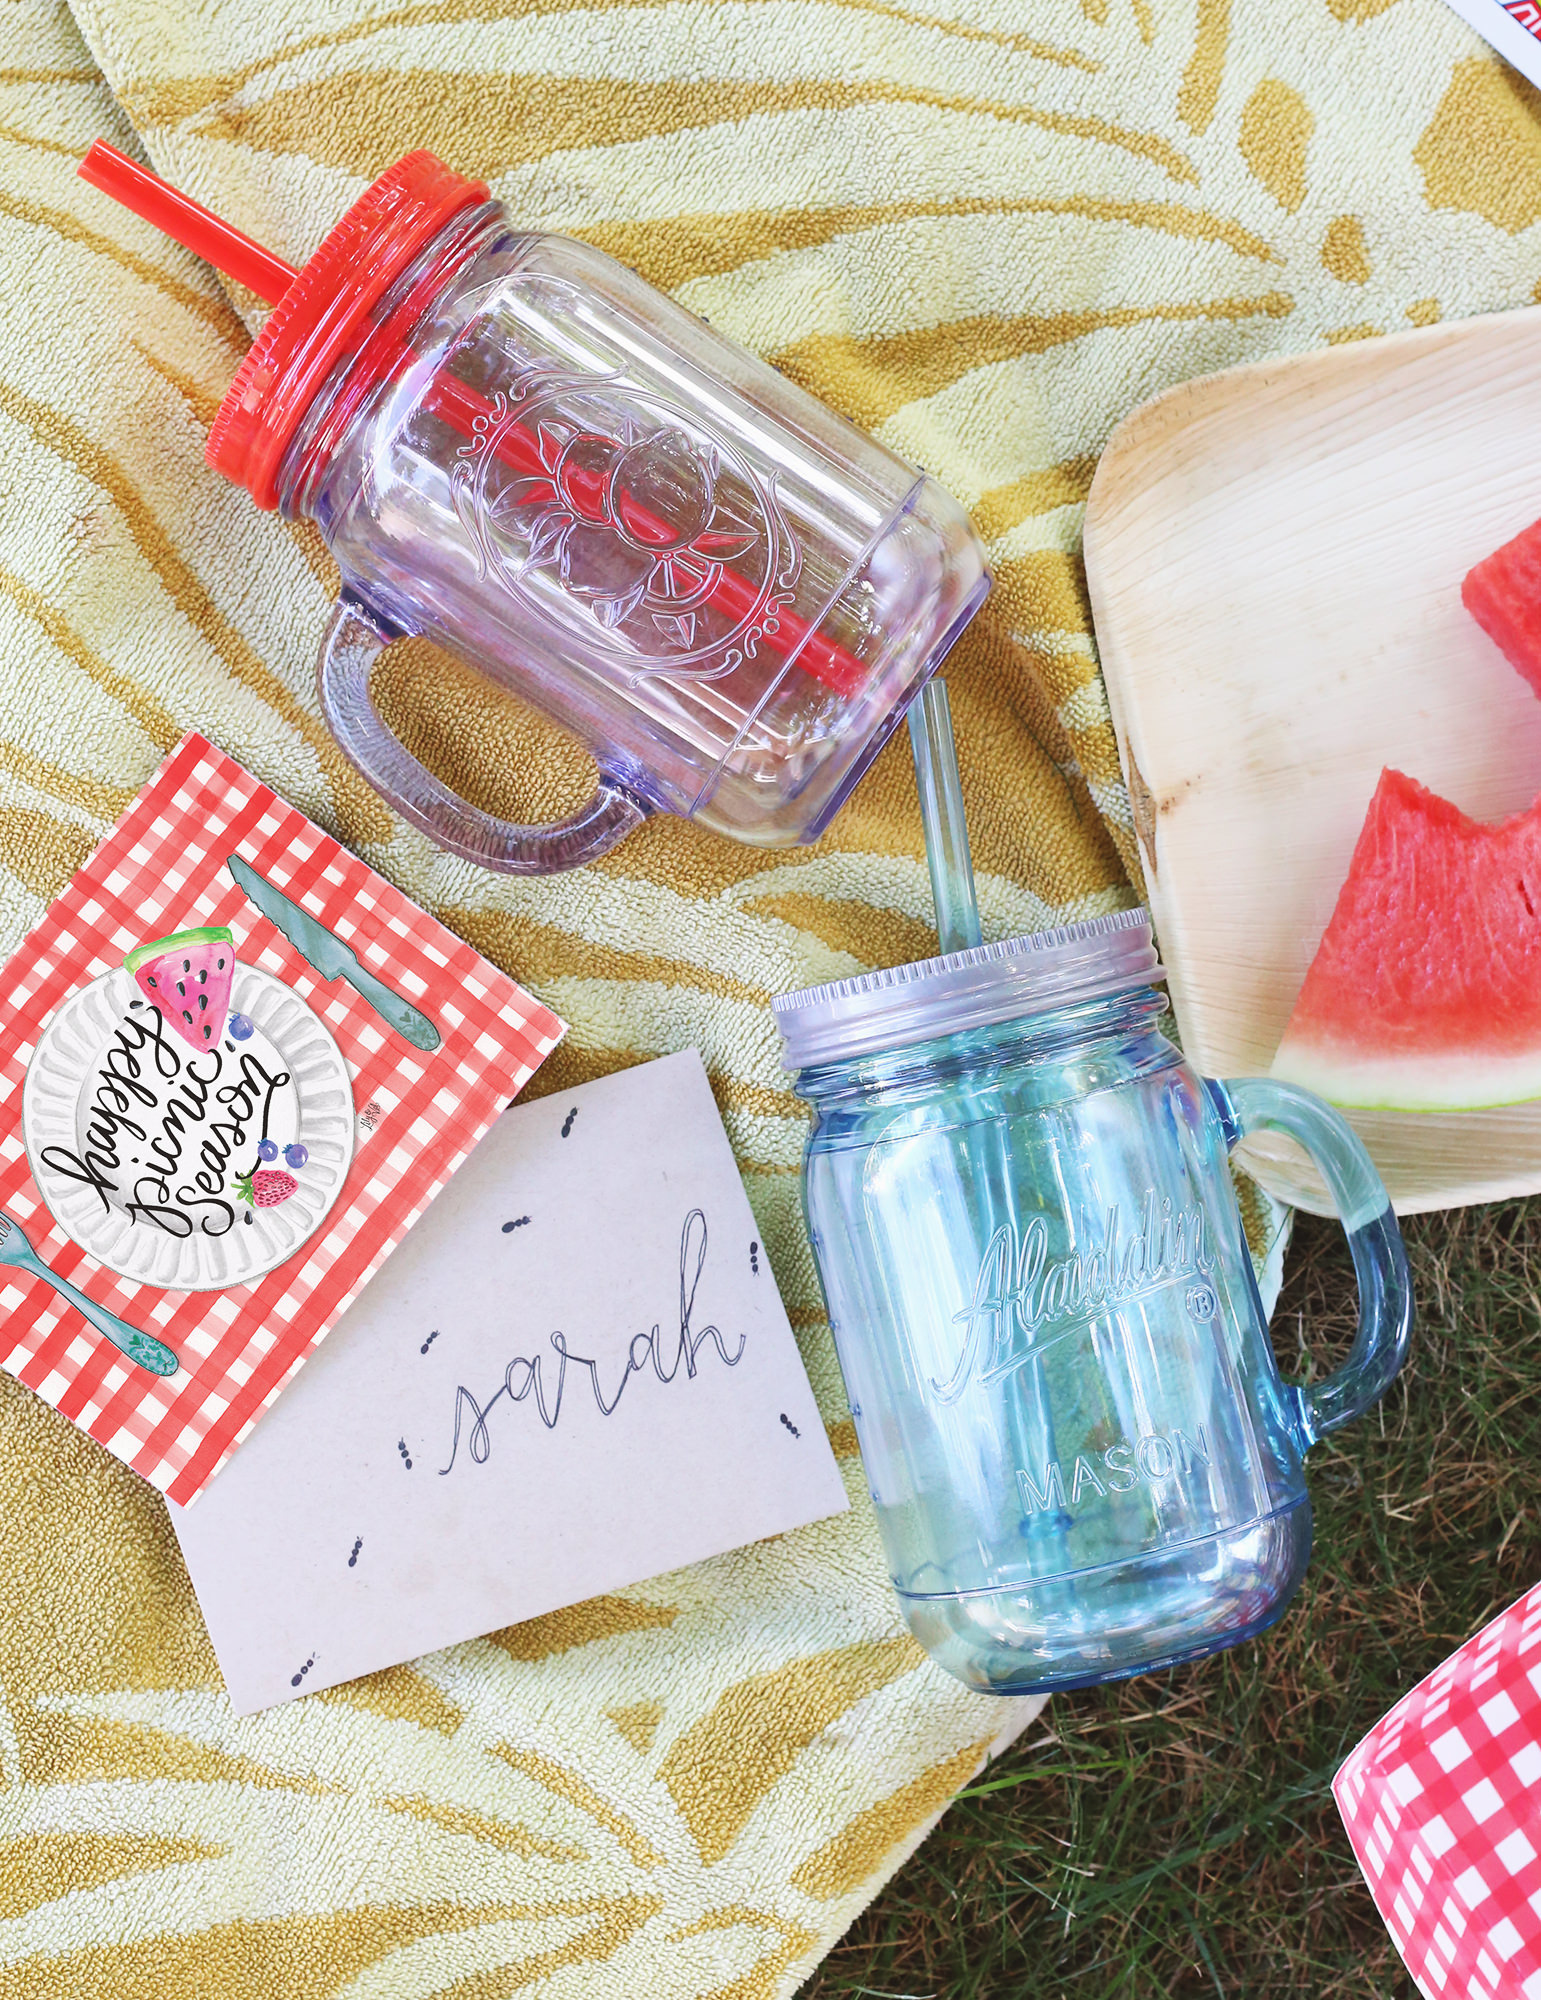 No picnic seems complete without ants- even if they're fake! A cute envelope decoration idea via Lily & Val Living!